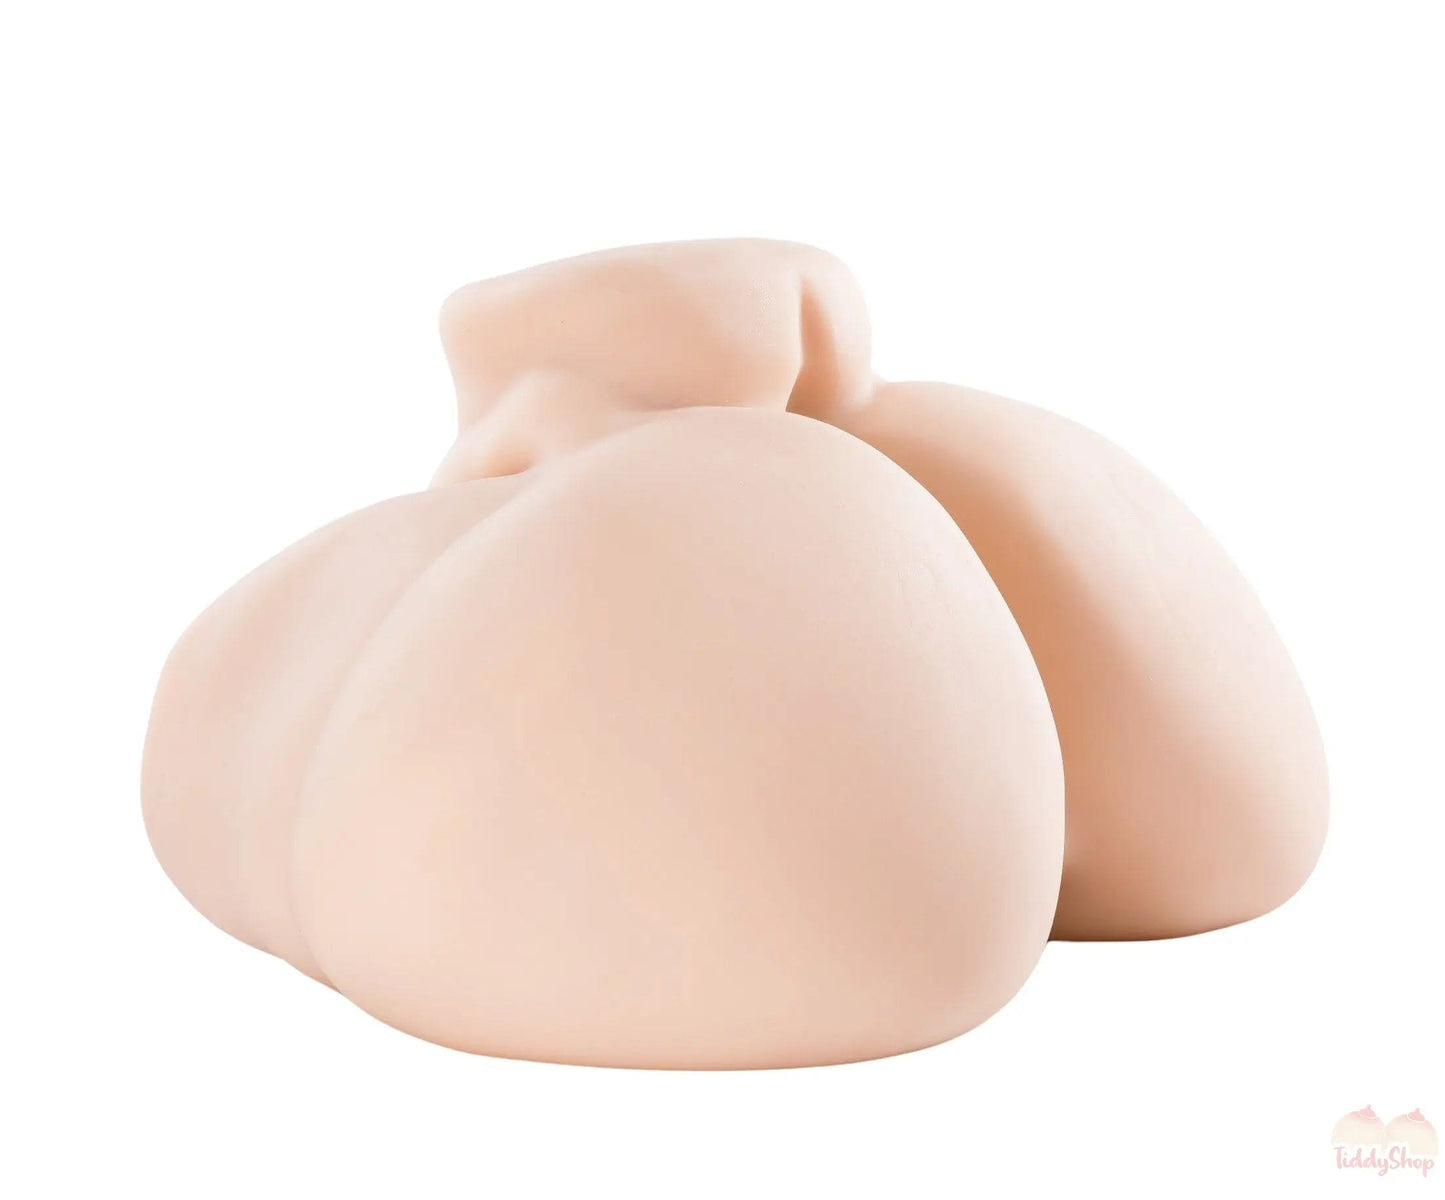 TiddyShop Heavenly Madame Squishable - JelloJiggles BBW Pear Gigantic Ass 94lb (43 kg)  - Extremely Jiggly Huge Booty Giant Butt Hip Toy Onahole - TiddyDollHouse TiddyShop Pale-Fully-Gel-Filled-in-first-video-No-added-colo